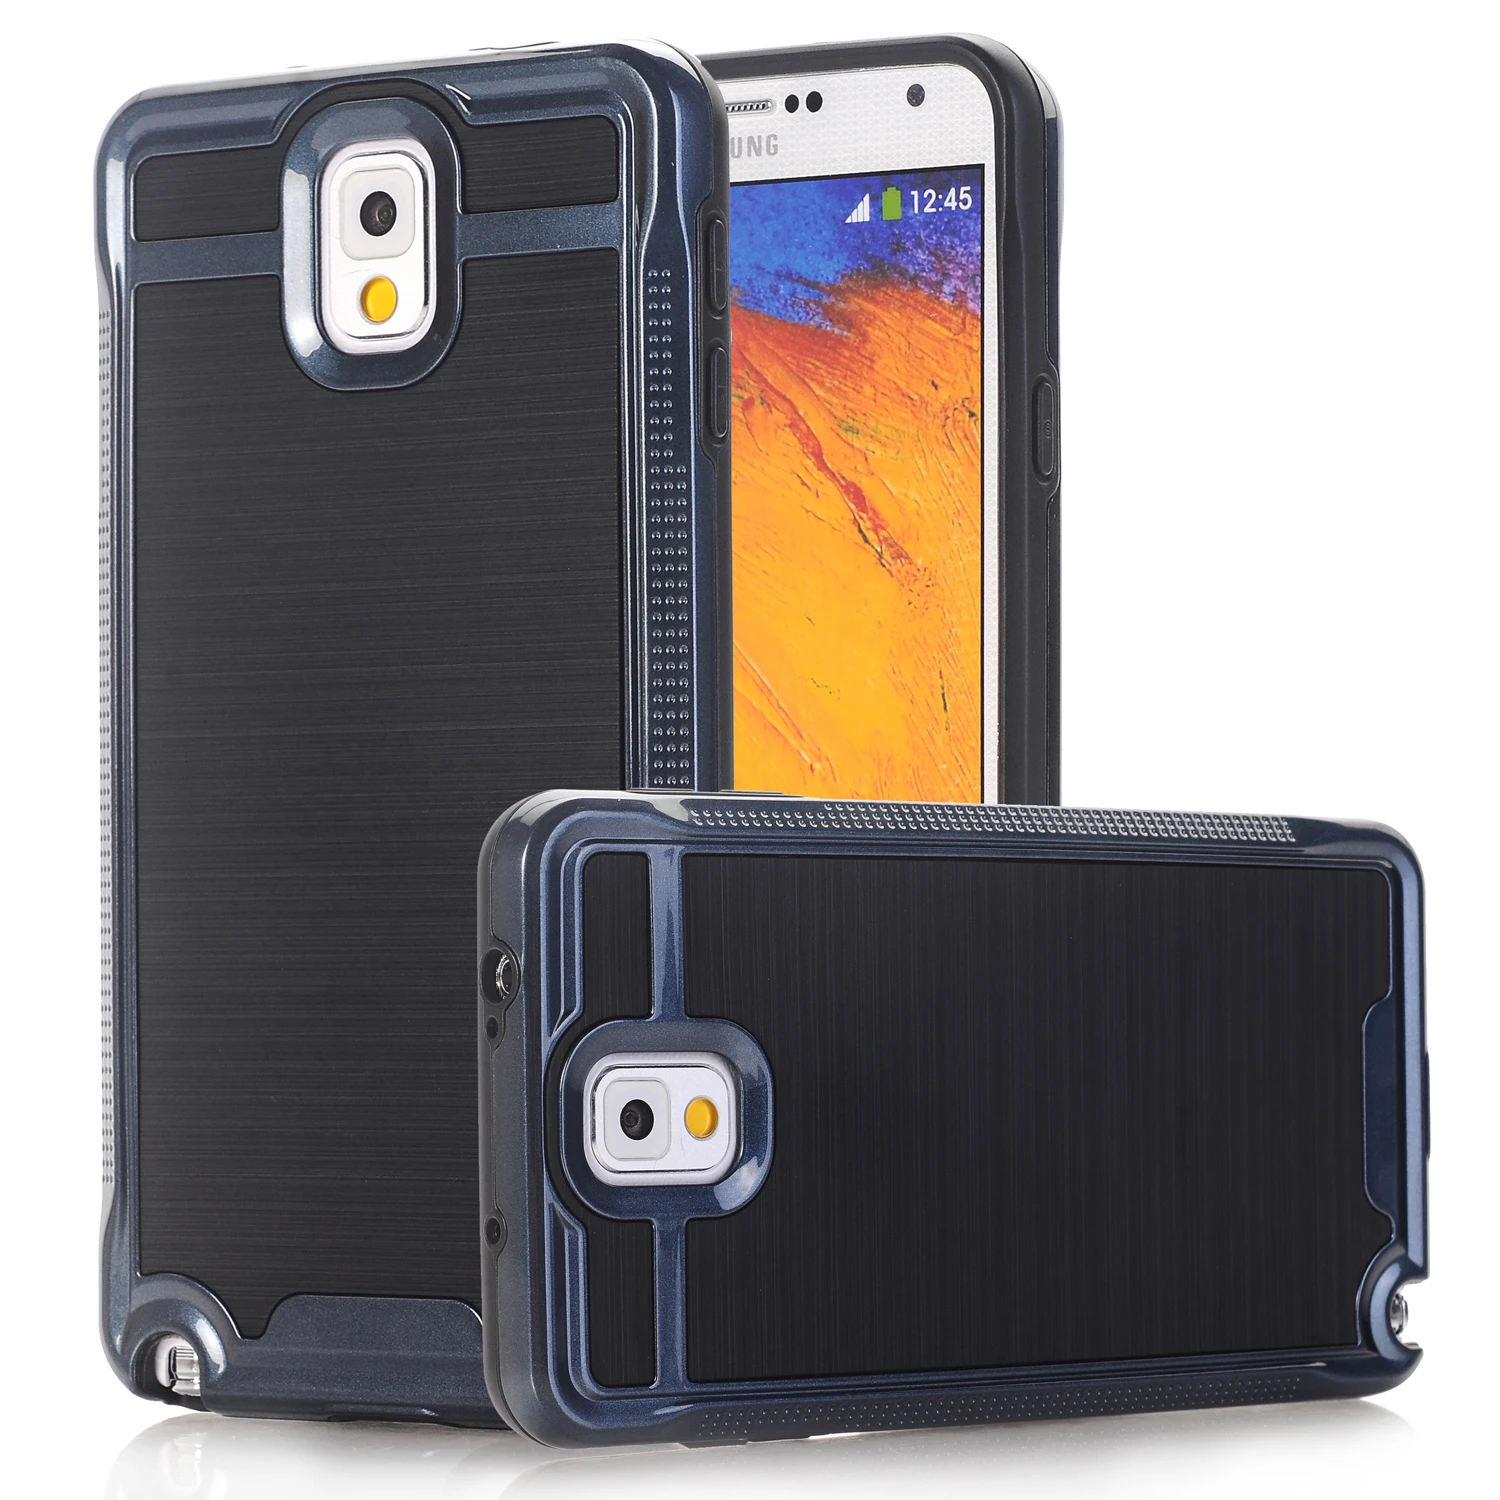 Case For Samsung Galaxy Note 3 N9000 Luxury Brushed PC+TPU 